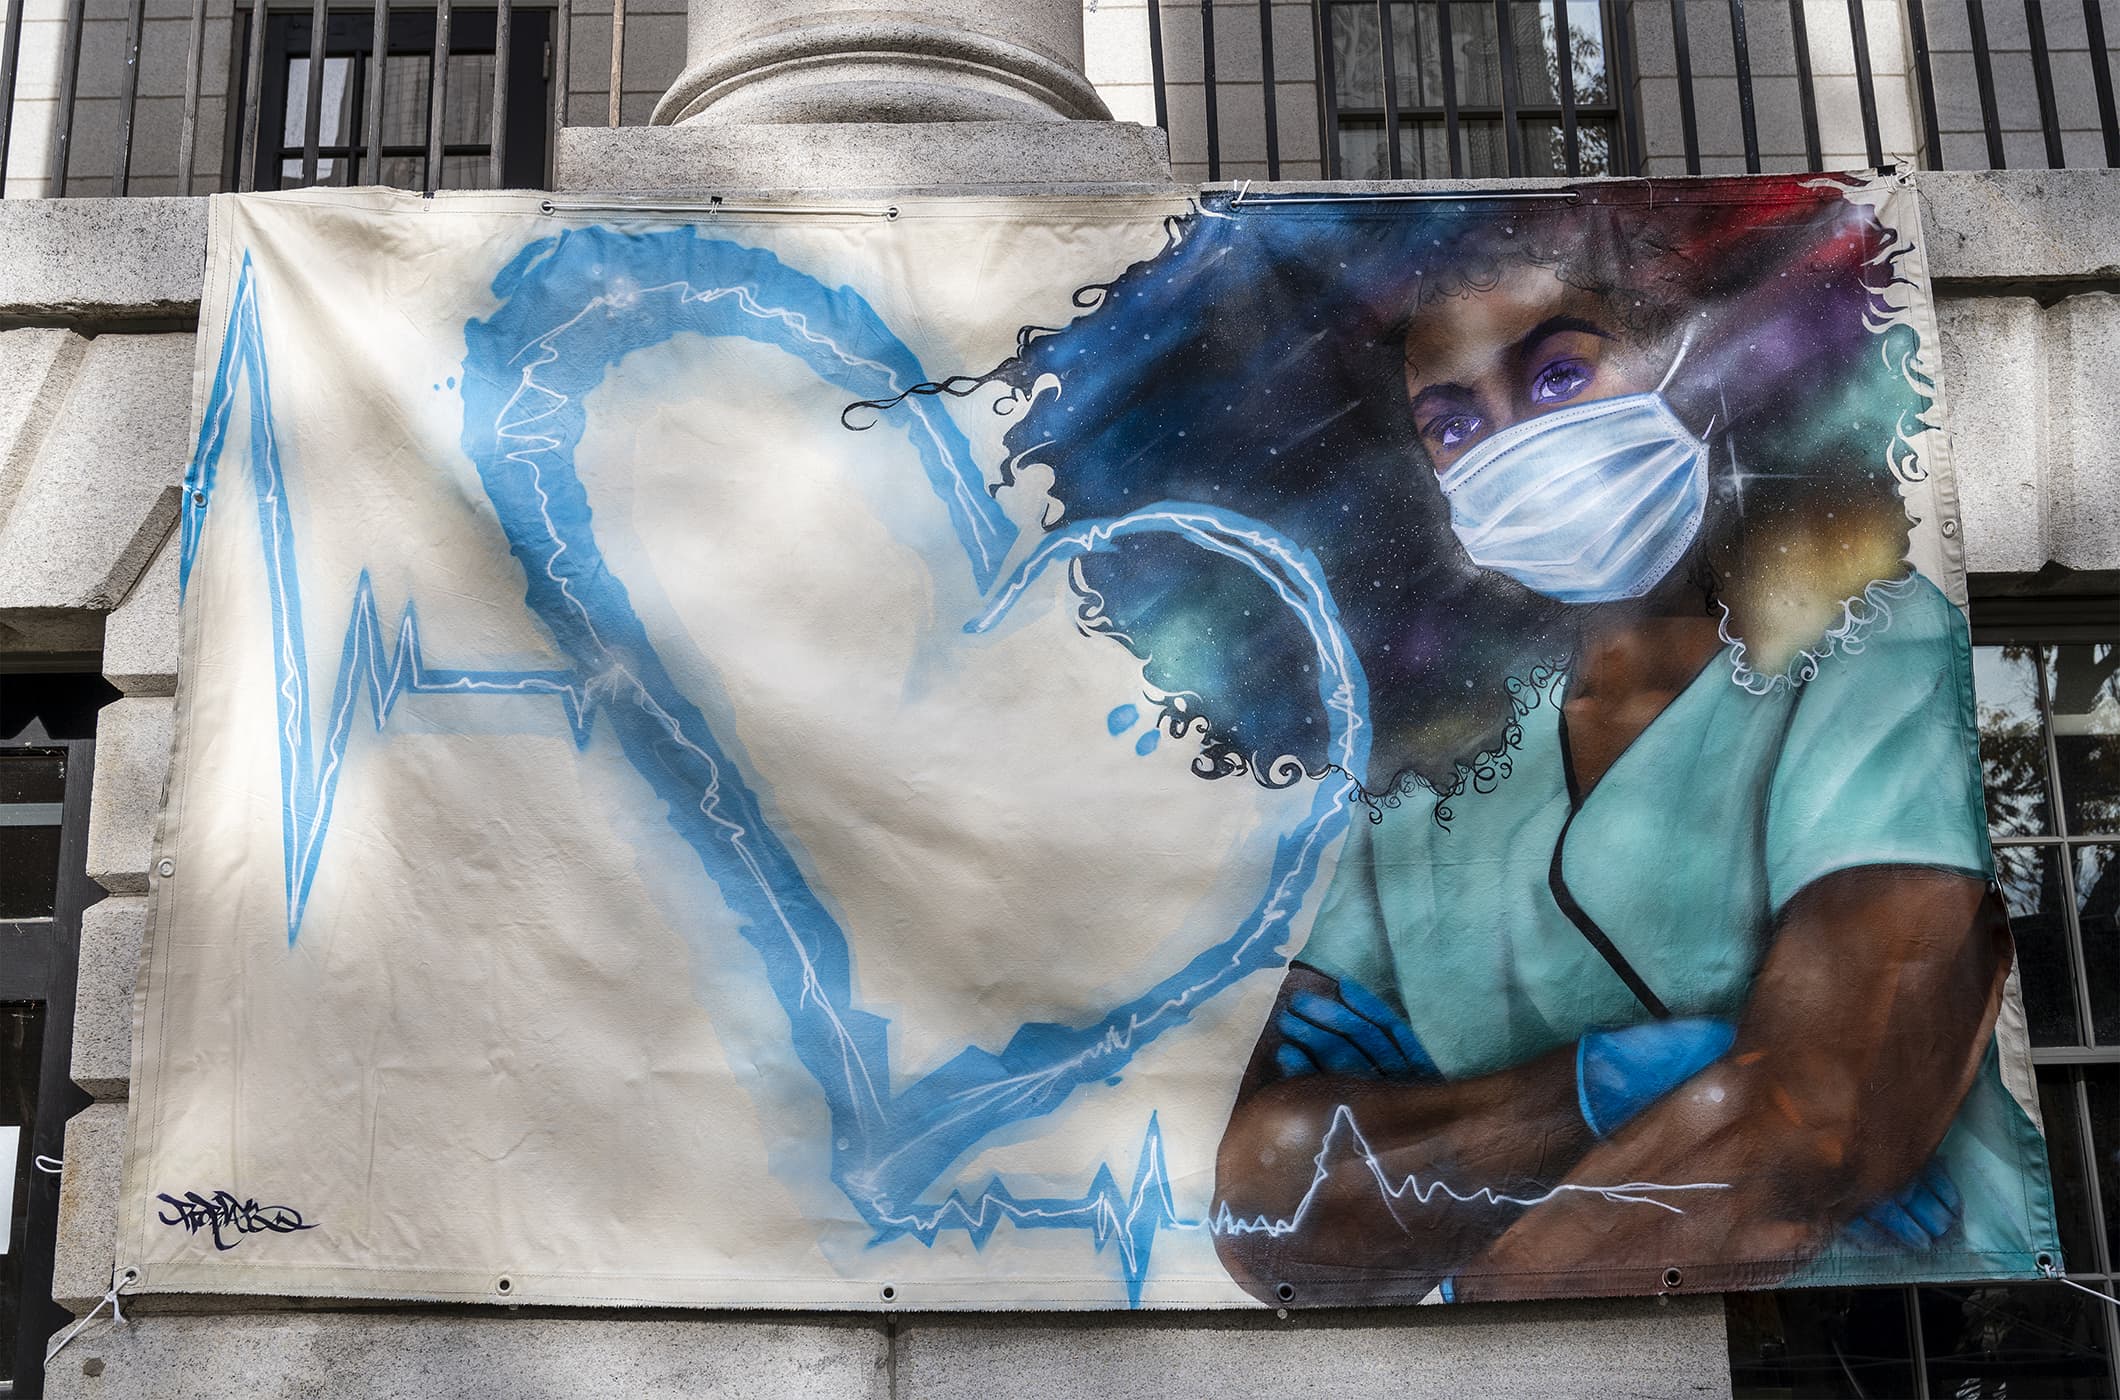 “Peoples’ heART Project” mural, spray paint on canvas, by Rob “ProBlak” Gibbs, at its unveiling on the MGH Bulfinch lawn, before it was exhibited indoors. (Photo by Eleni Balasalle)